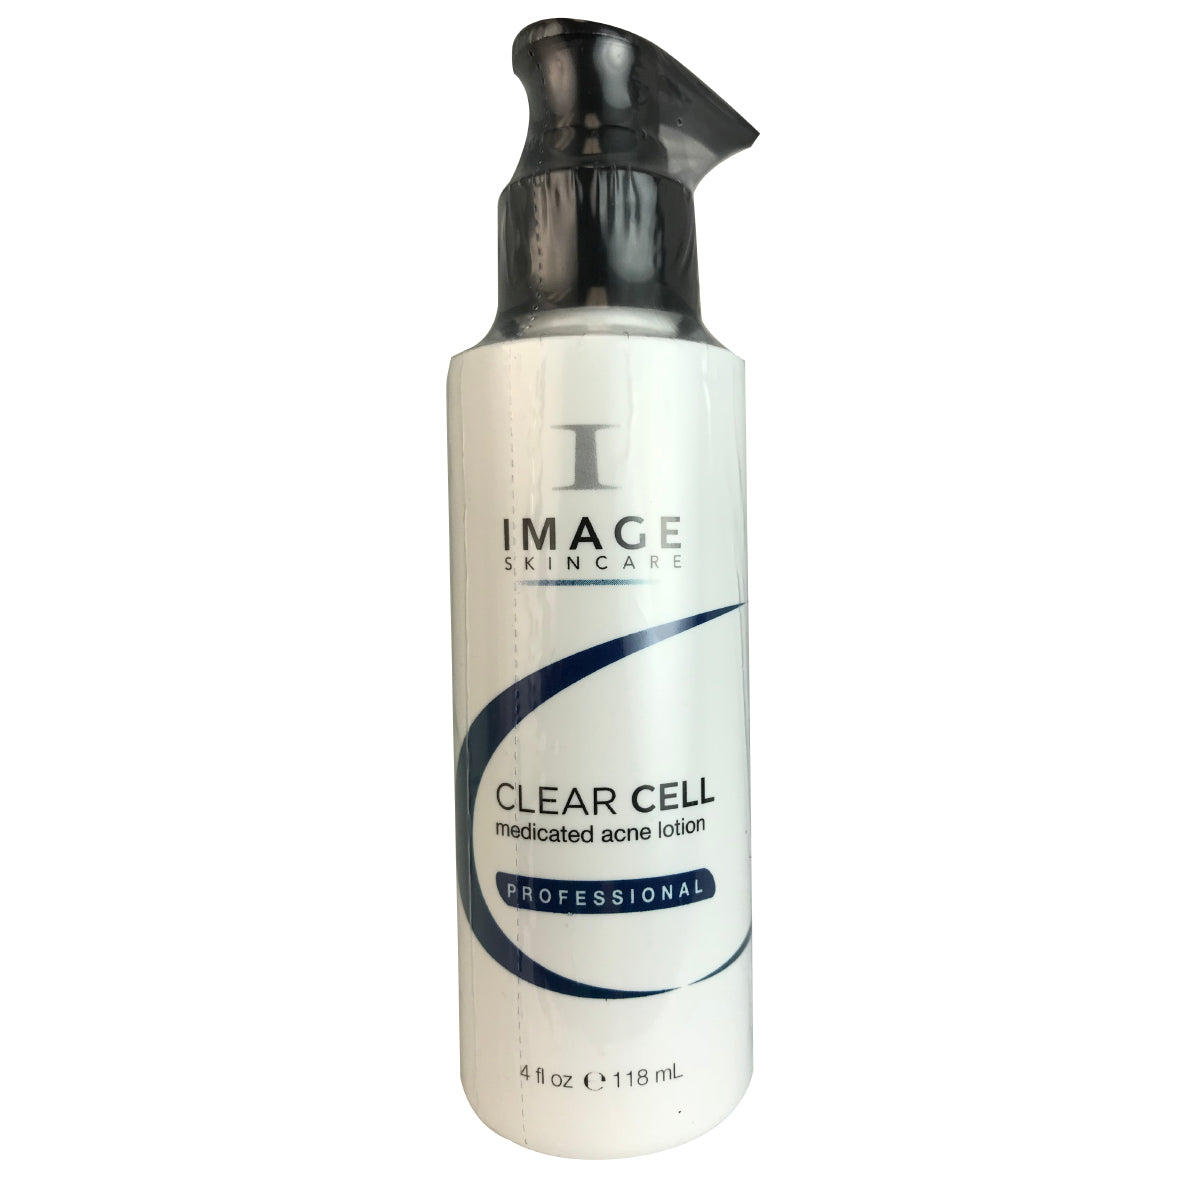 Image Clear Cell Medicated Facial Acne Lotion 4 oz.